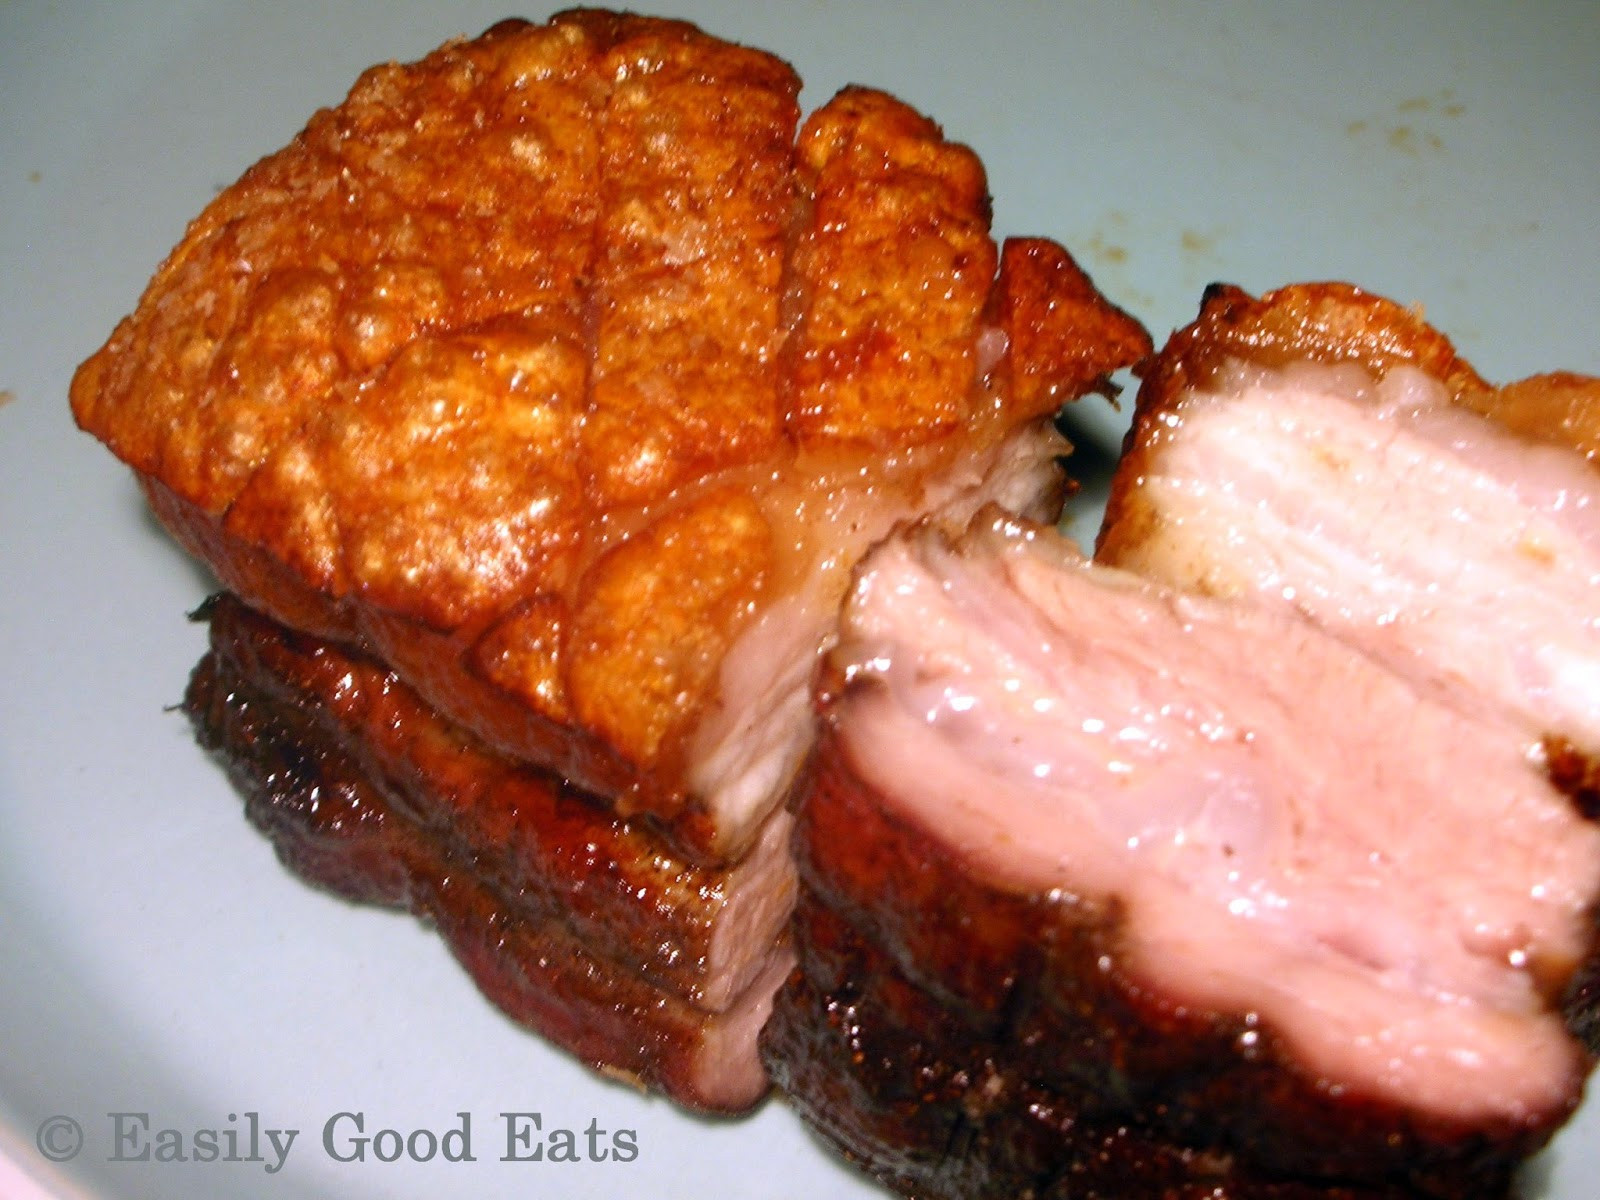 Chinese Roast Pork Belly Recipes
 Easily Good Eats Crispy Chinese Roasted Pork Belly Recipe